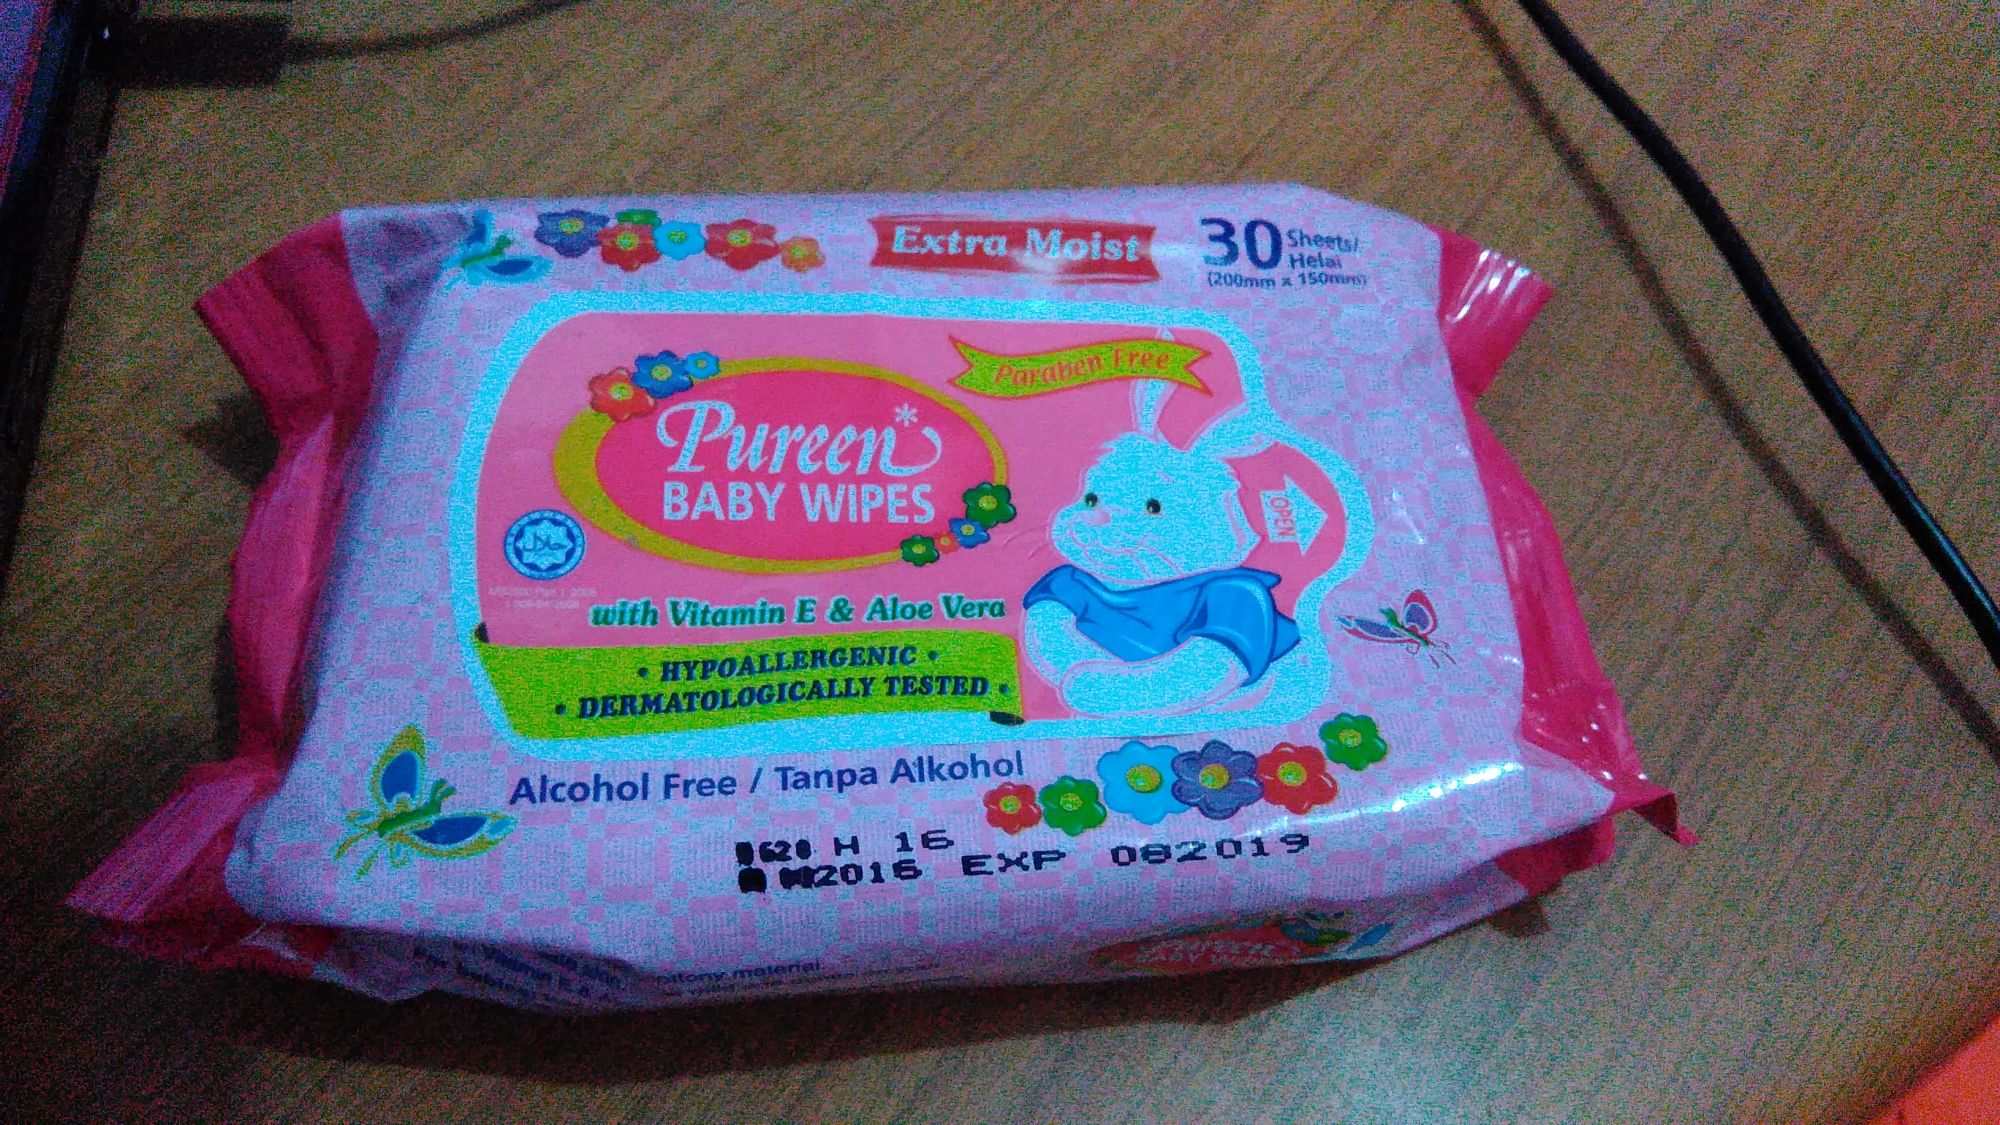 Pureen Baby Wipes in Pink Packaging reviews